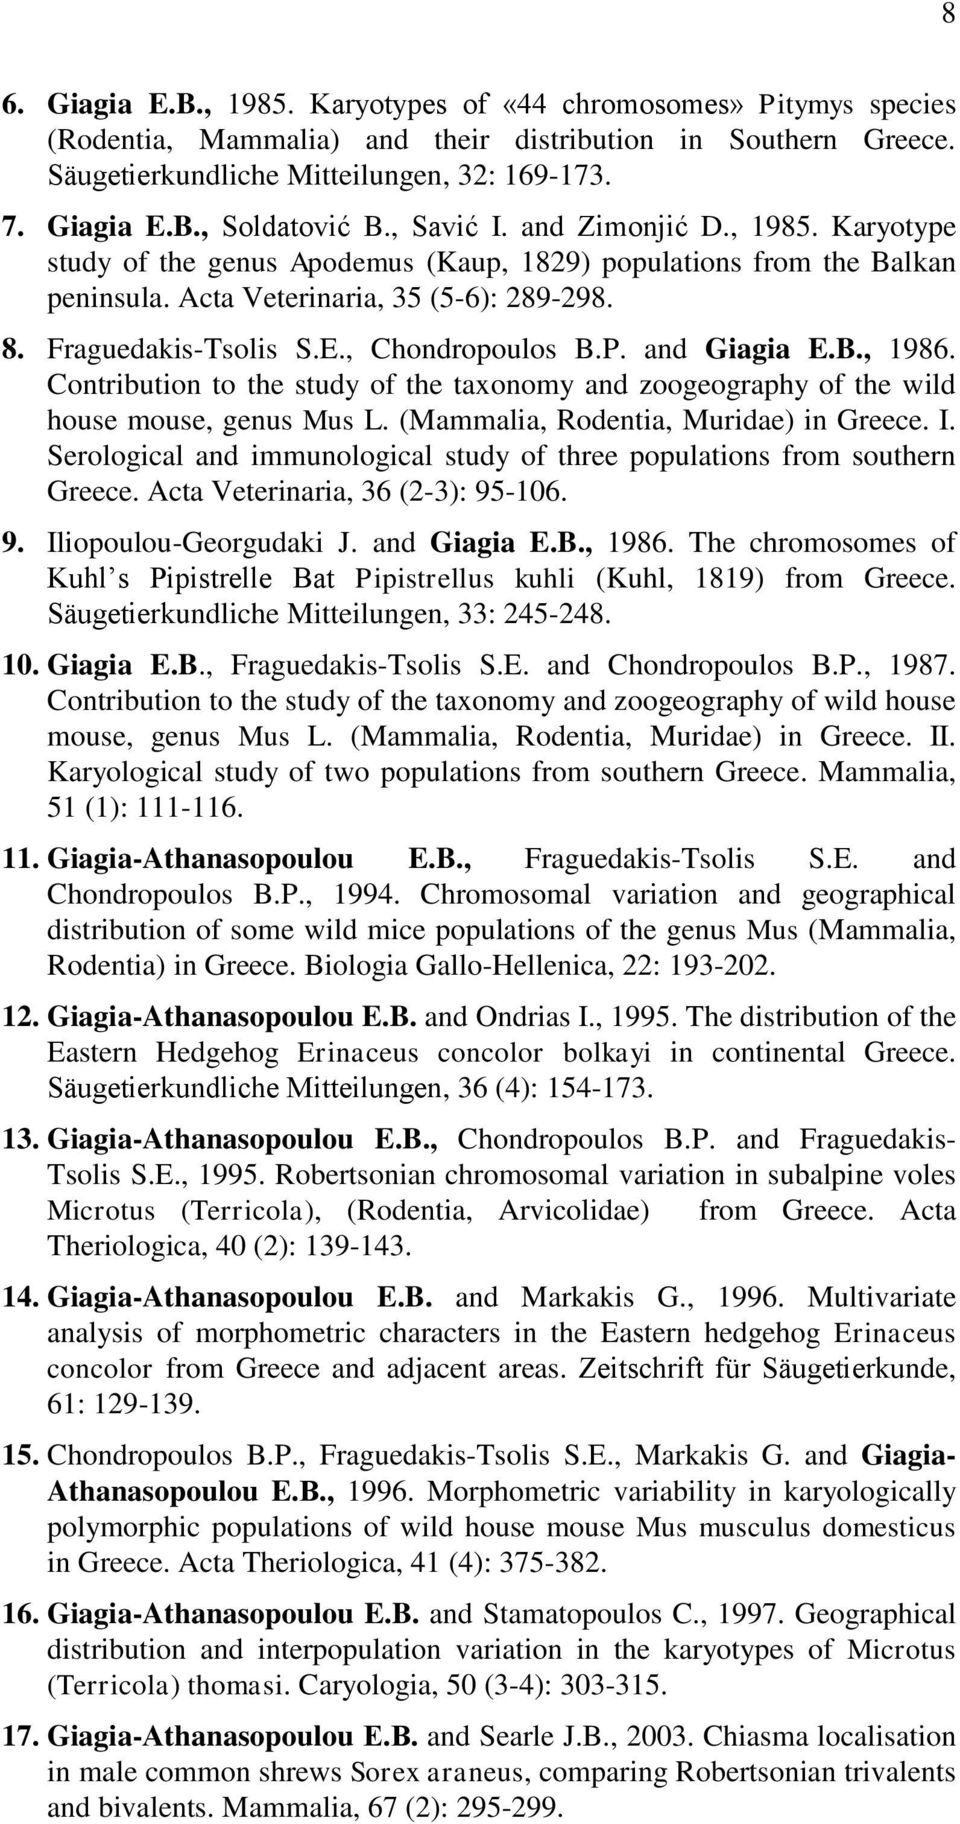 , Chondropoulos B.P. and Giagia E.B., 1986. Contribution to the study of the taxonomy and zoogeography of the wild house mouse, genus Mus L. (Mammalia, Rodentia, Muridae) in Greece. I.